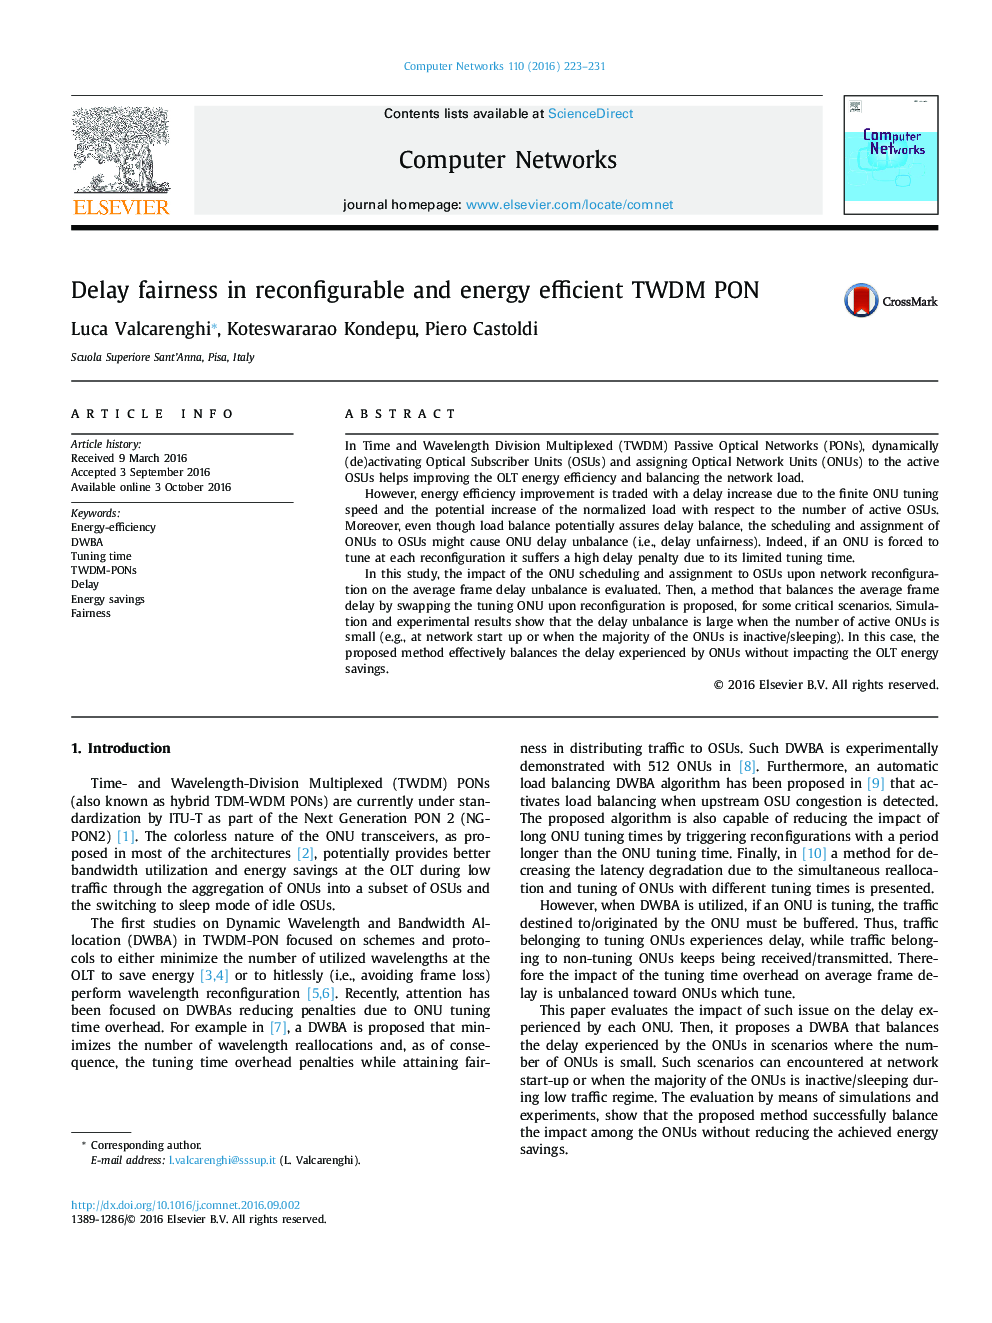 Delay fairness in reconfigurable and energy efficient TWDM PON